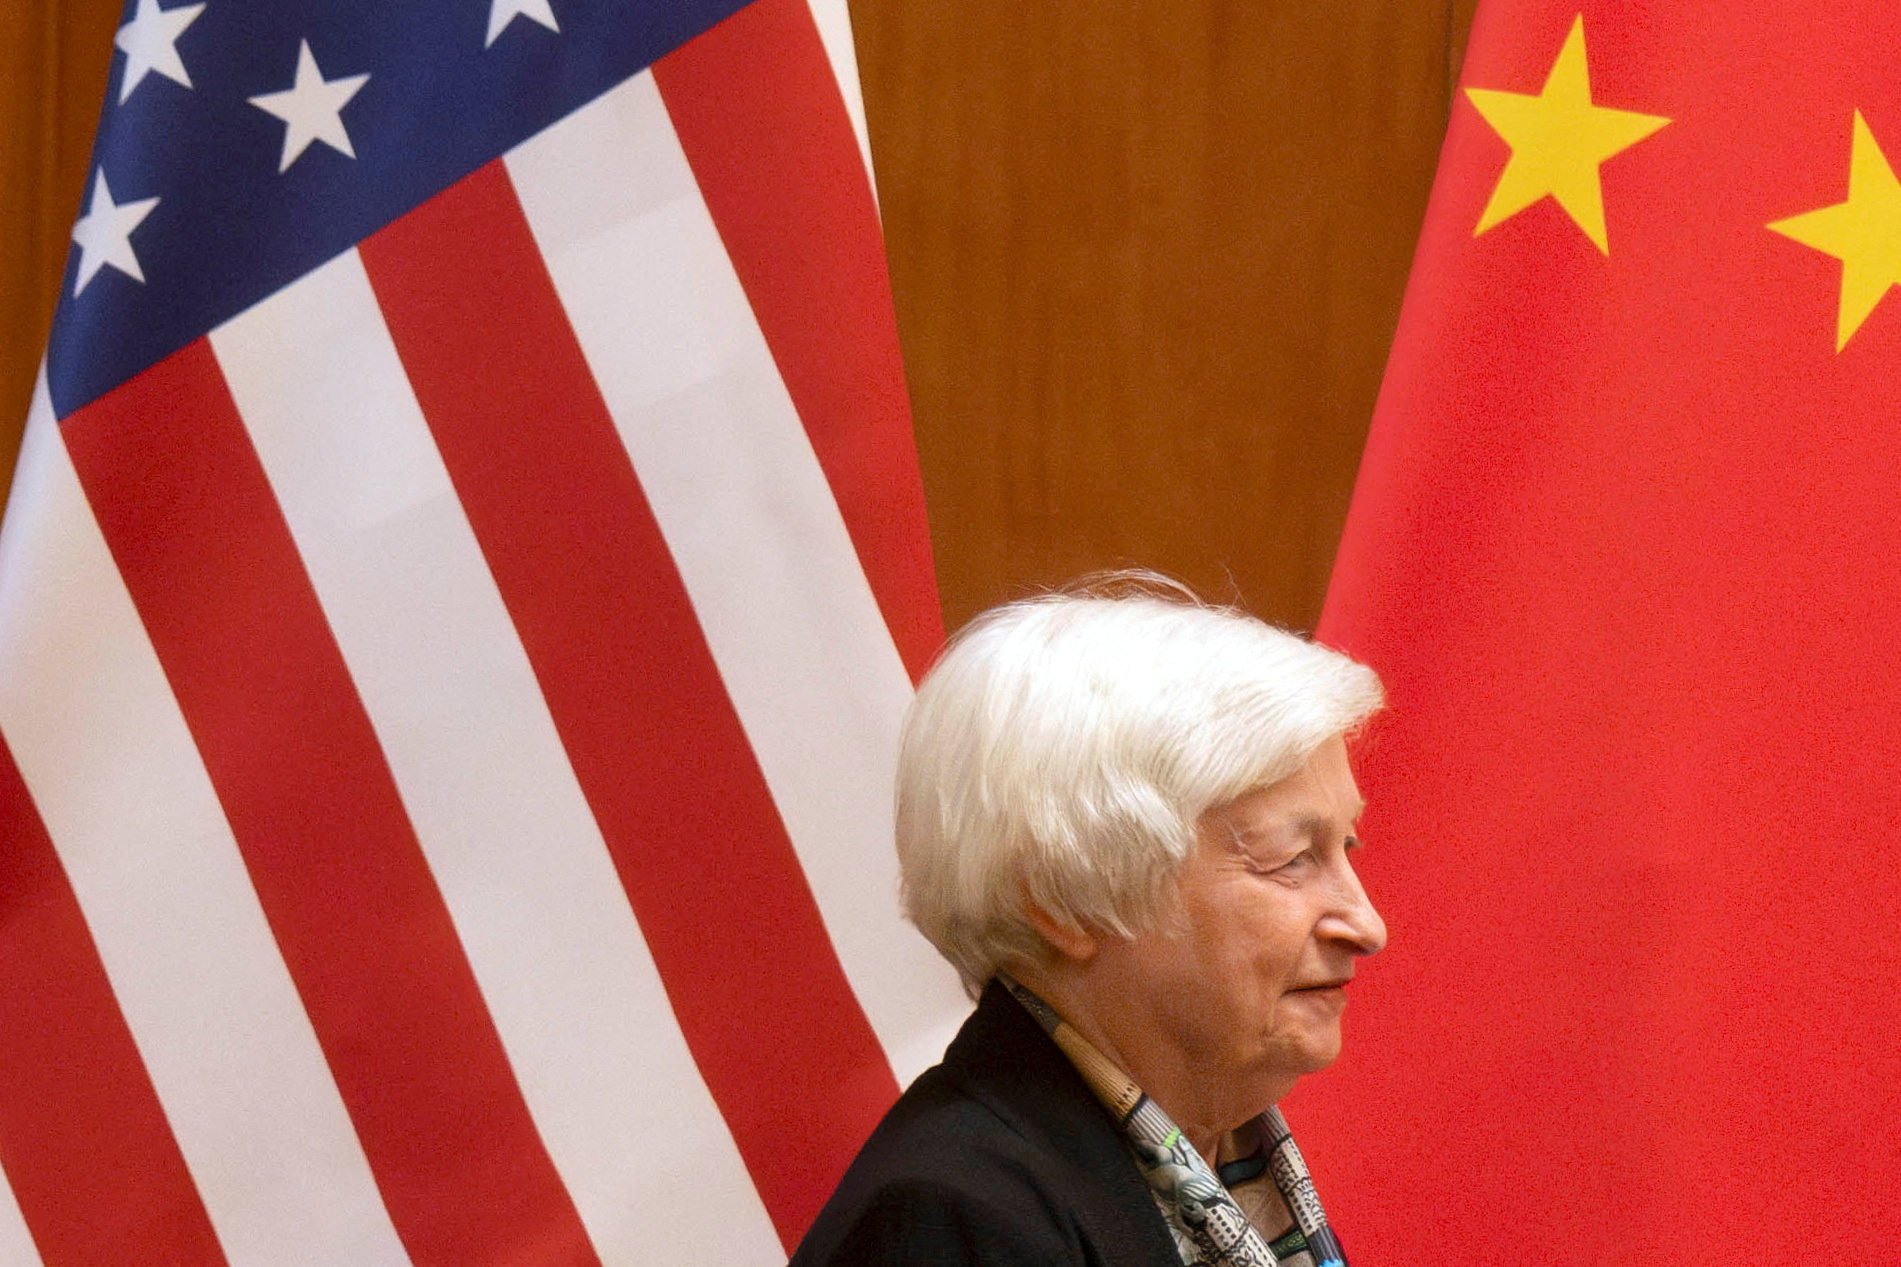 US Treasury Secretary Janet Yellen at the Diaoyutai State Guesthouse in Beijing, on July 8. Yellen, a first-rate economist, was right in judging it disastrous to try to decouple from China. But saying no to that and yes to “de-risking” is a false dichotomy. Photo: Reuters